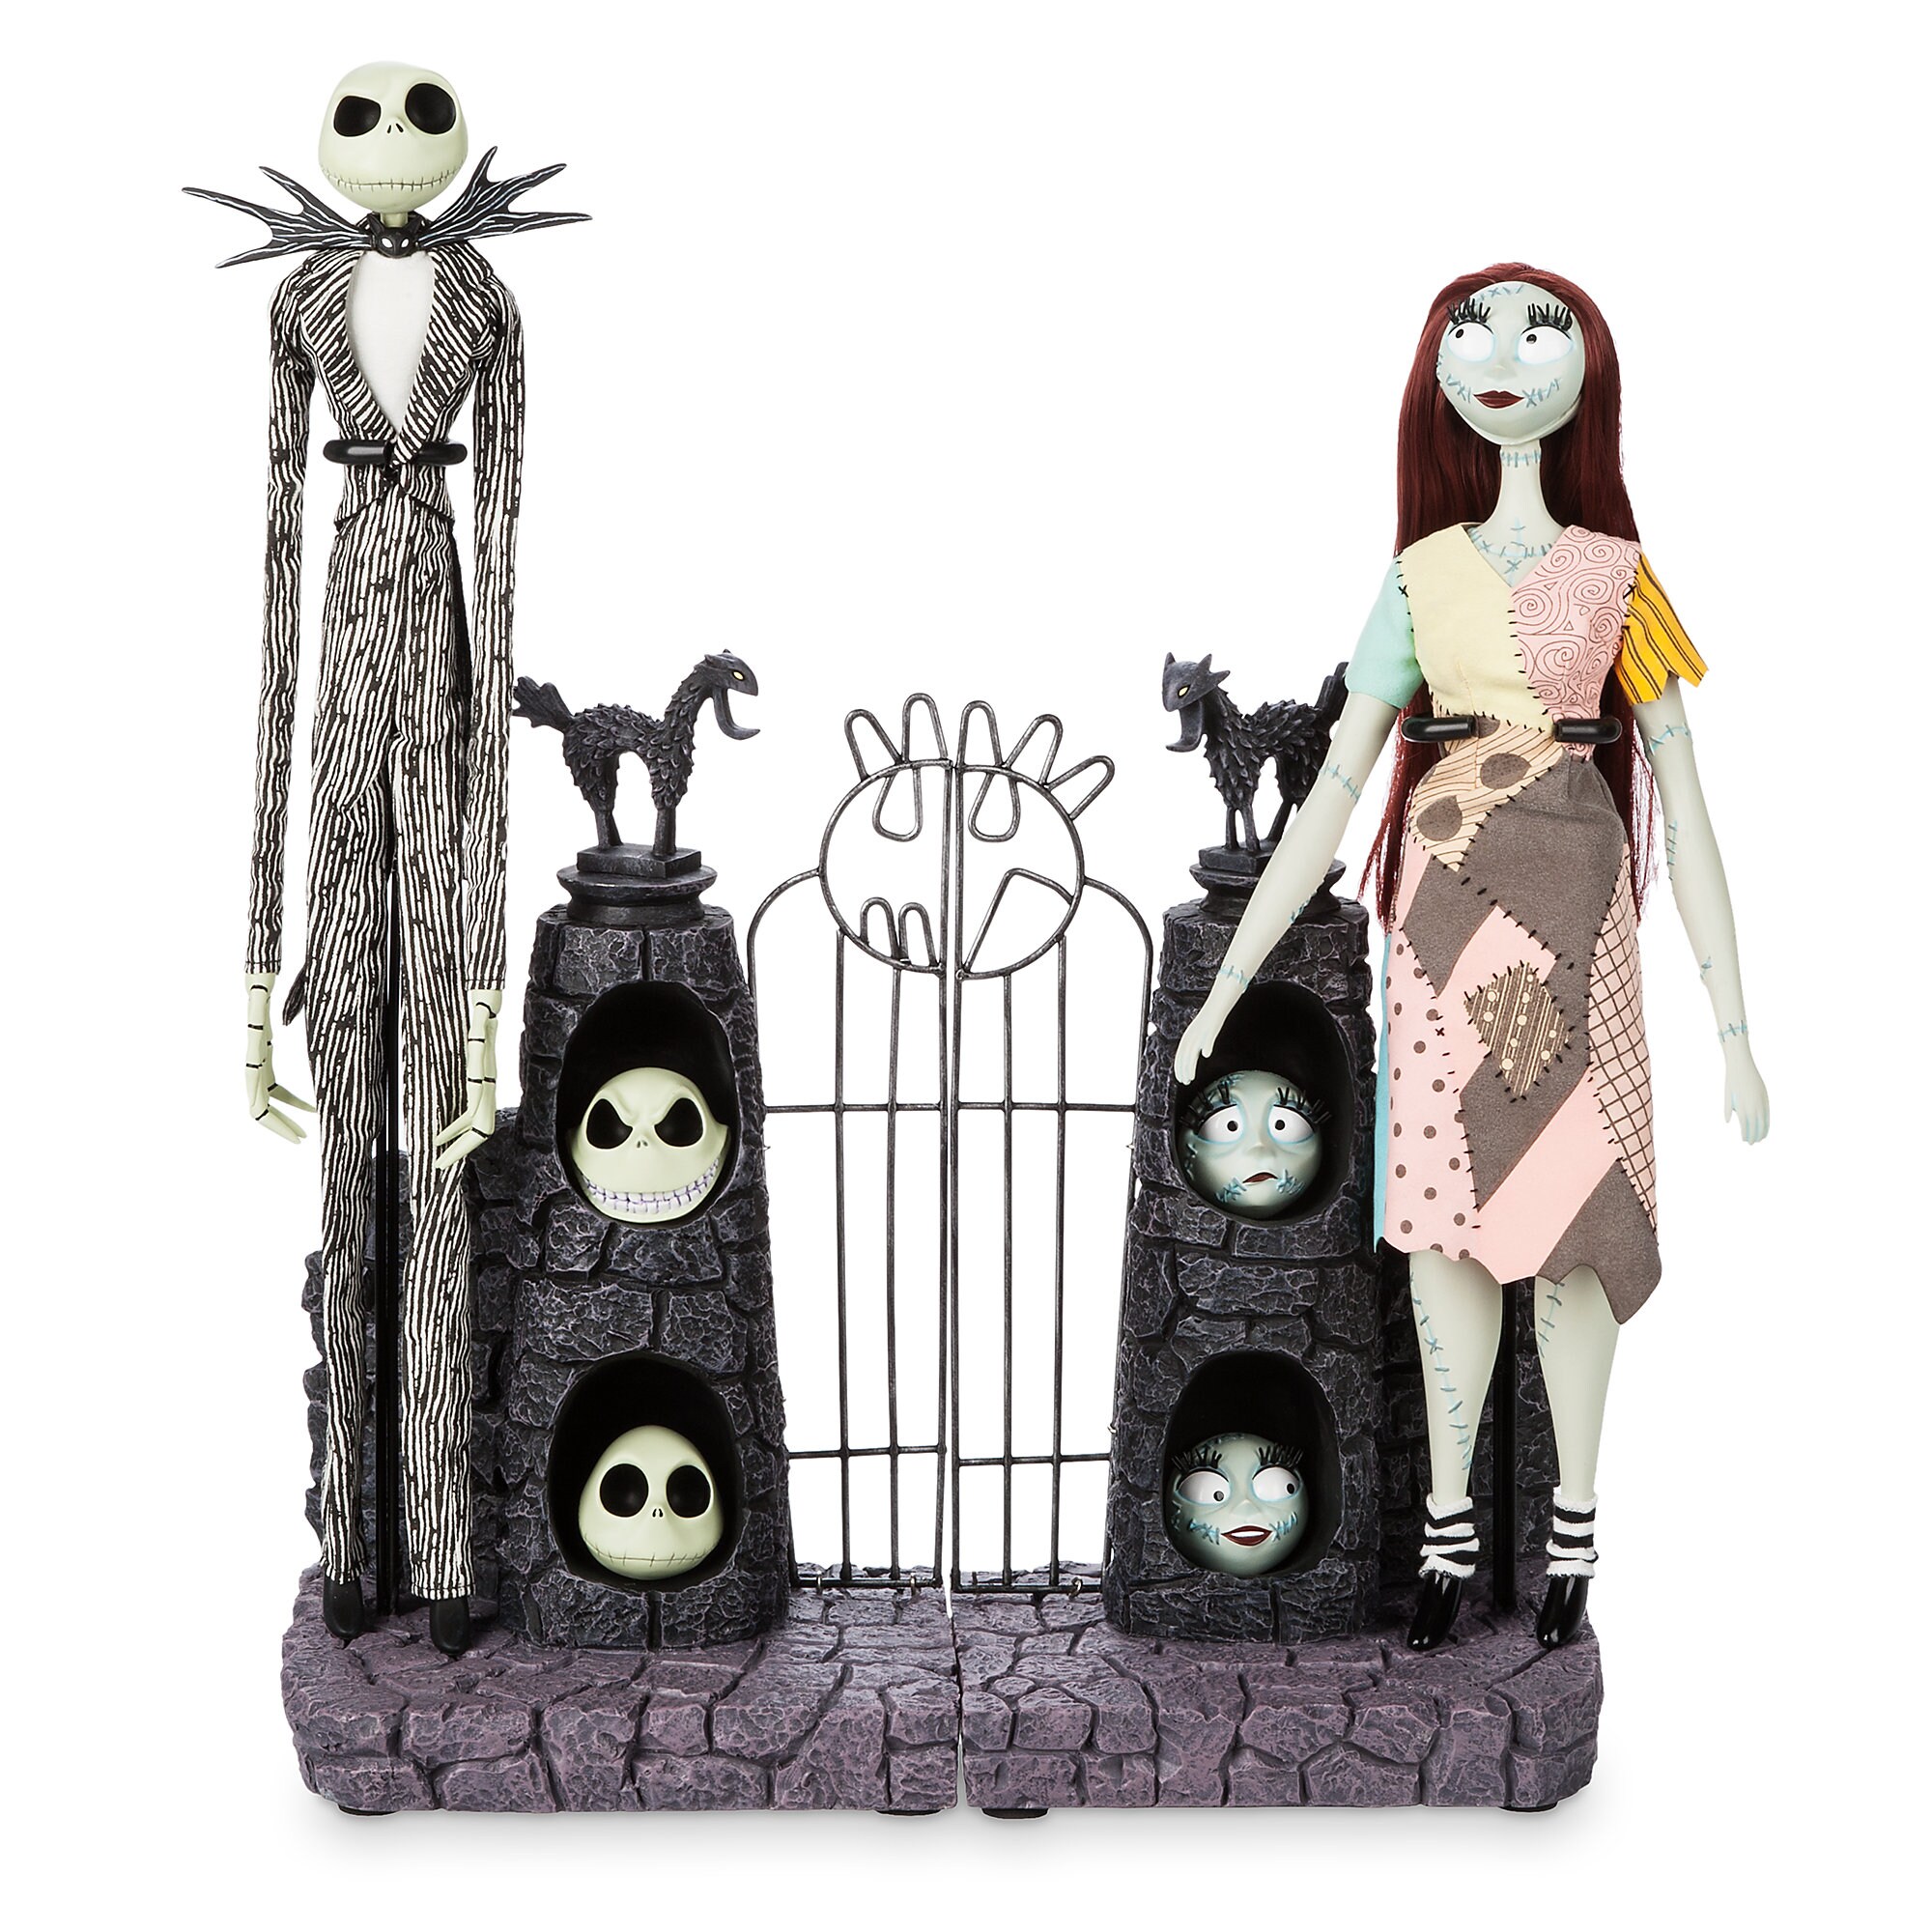 Jack Skellington 25th Anniversary Limited Edition Doll - The Nightmare Before Christmas